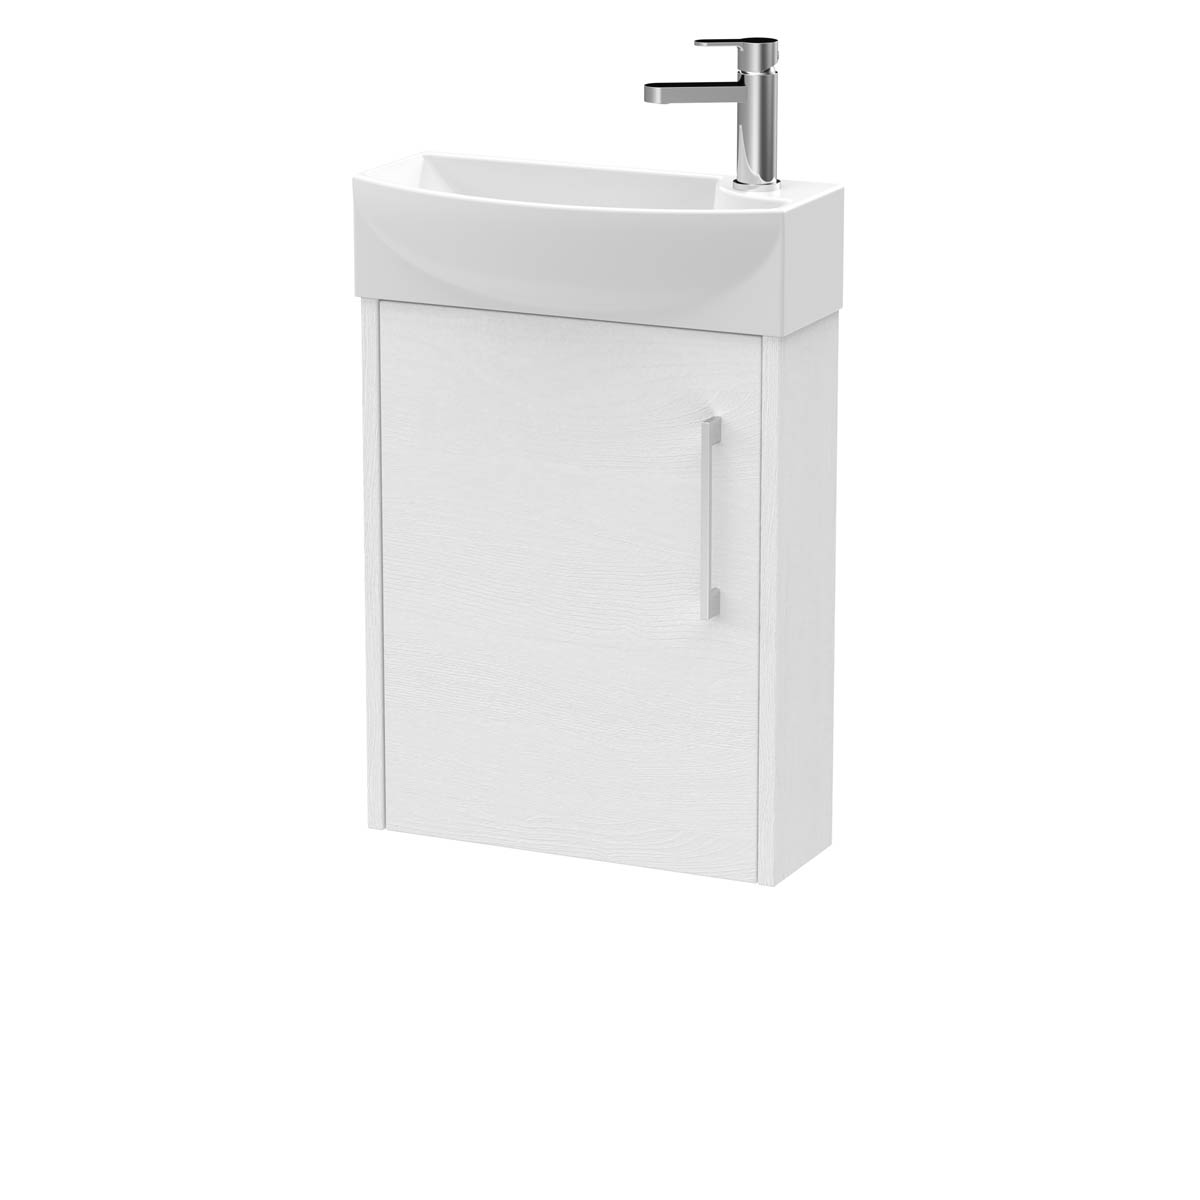 Hudson Reed Juno Compact 440mm White Ash Wall Hung 1 Door Unit & 1 Tap Hole Basin LH